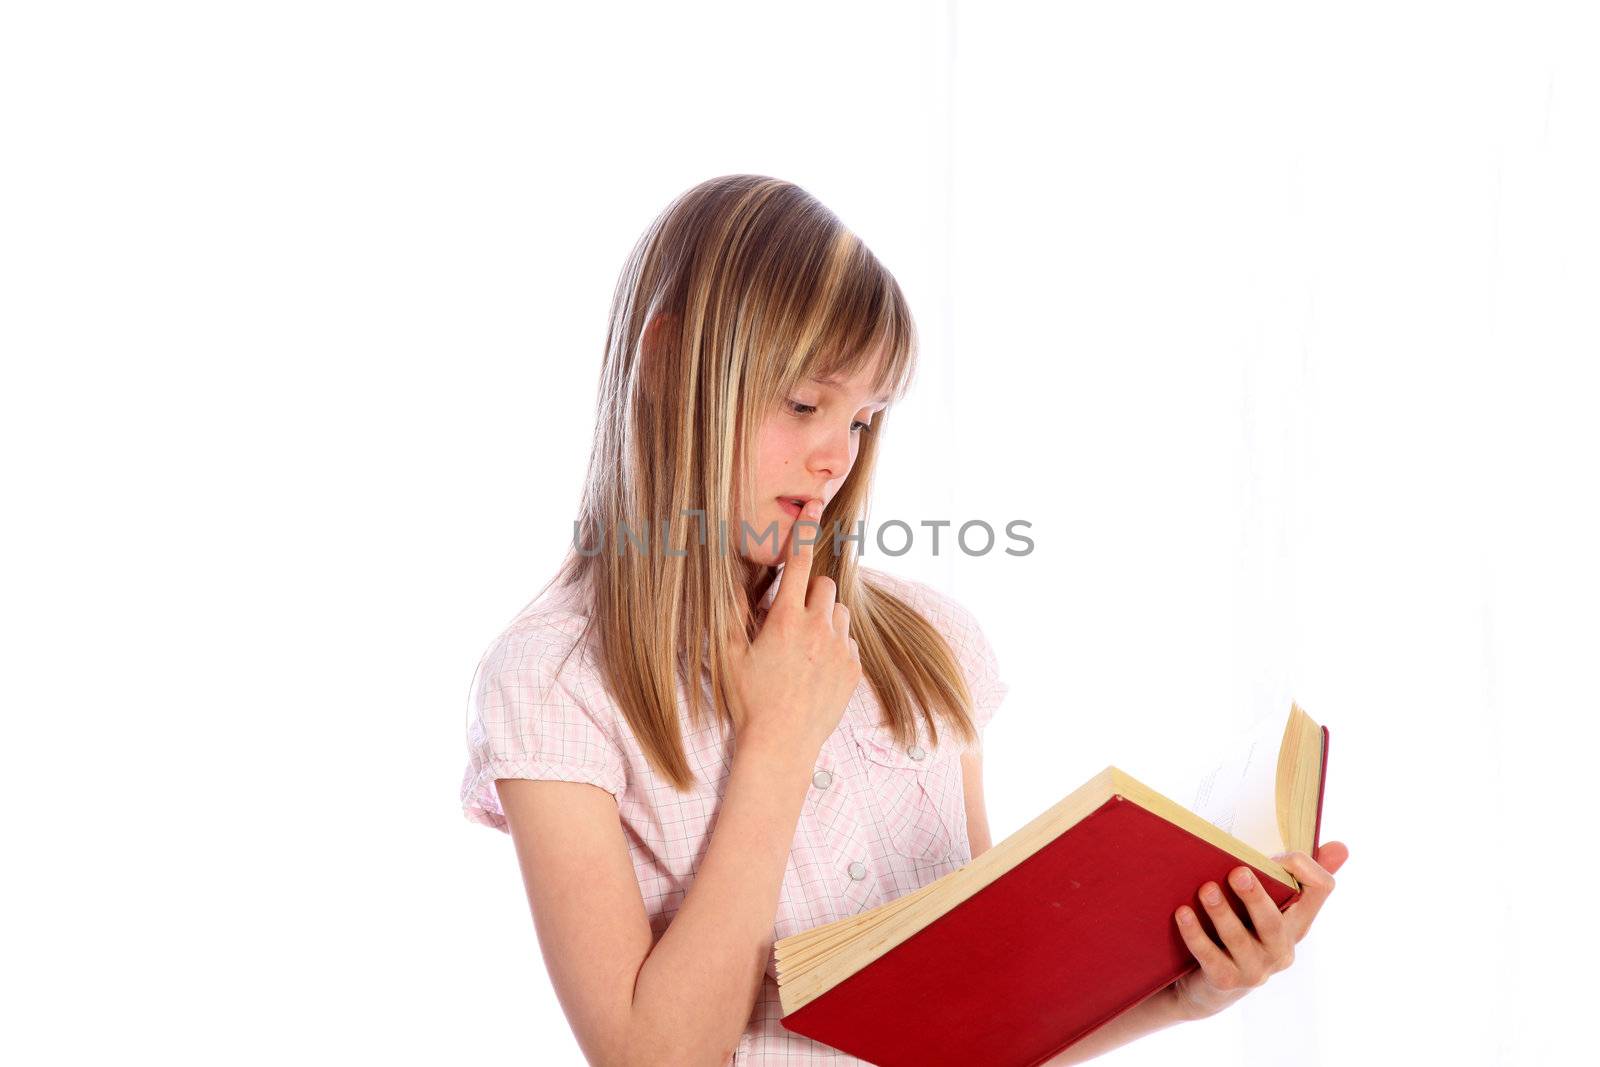 A pensive blond girl with a red book  by Farina6000